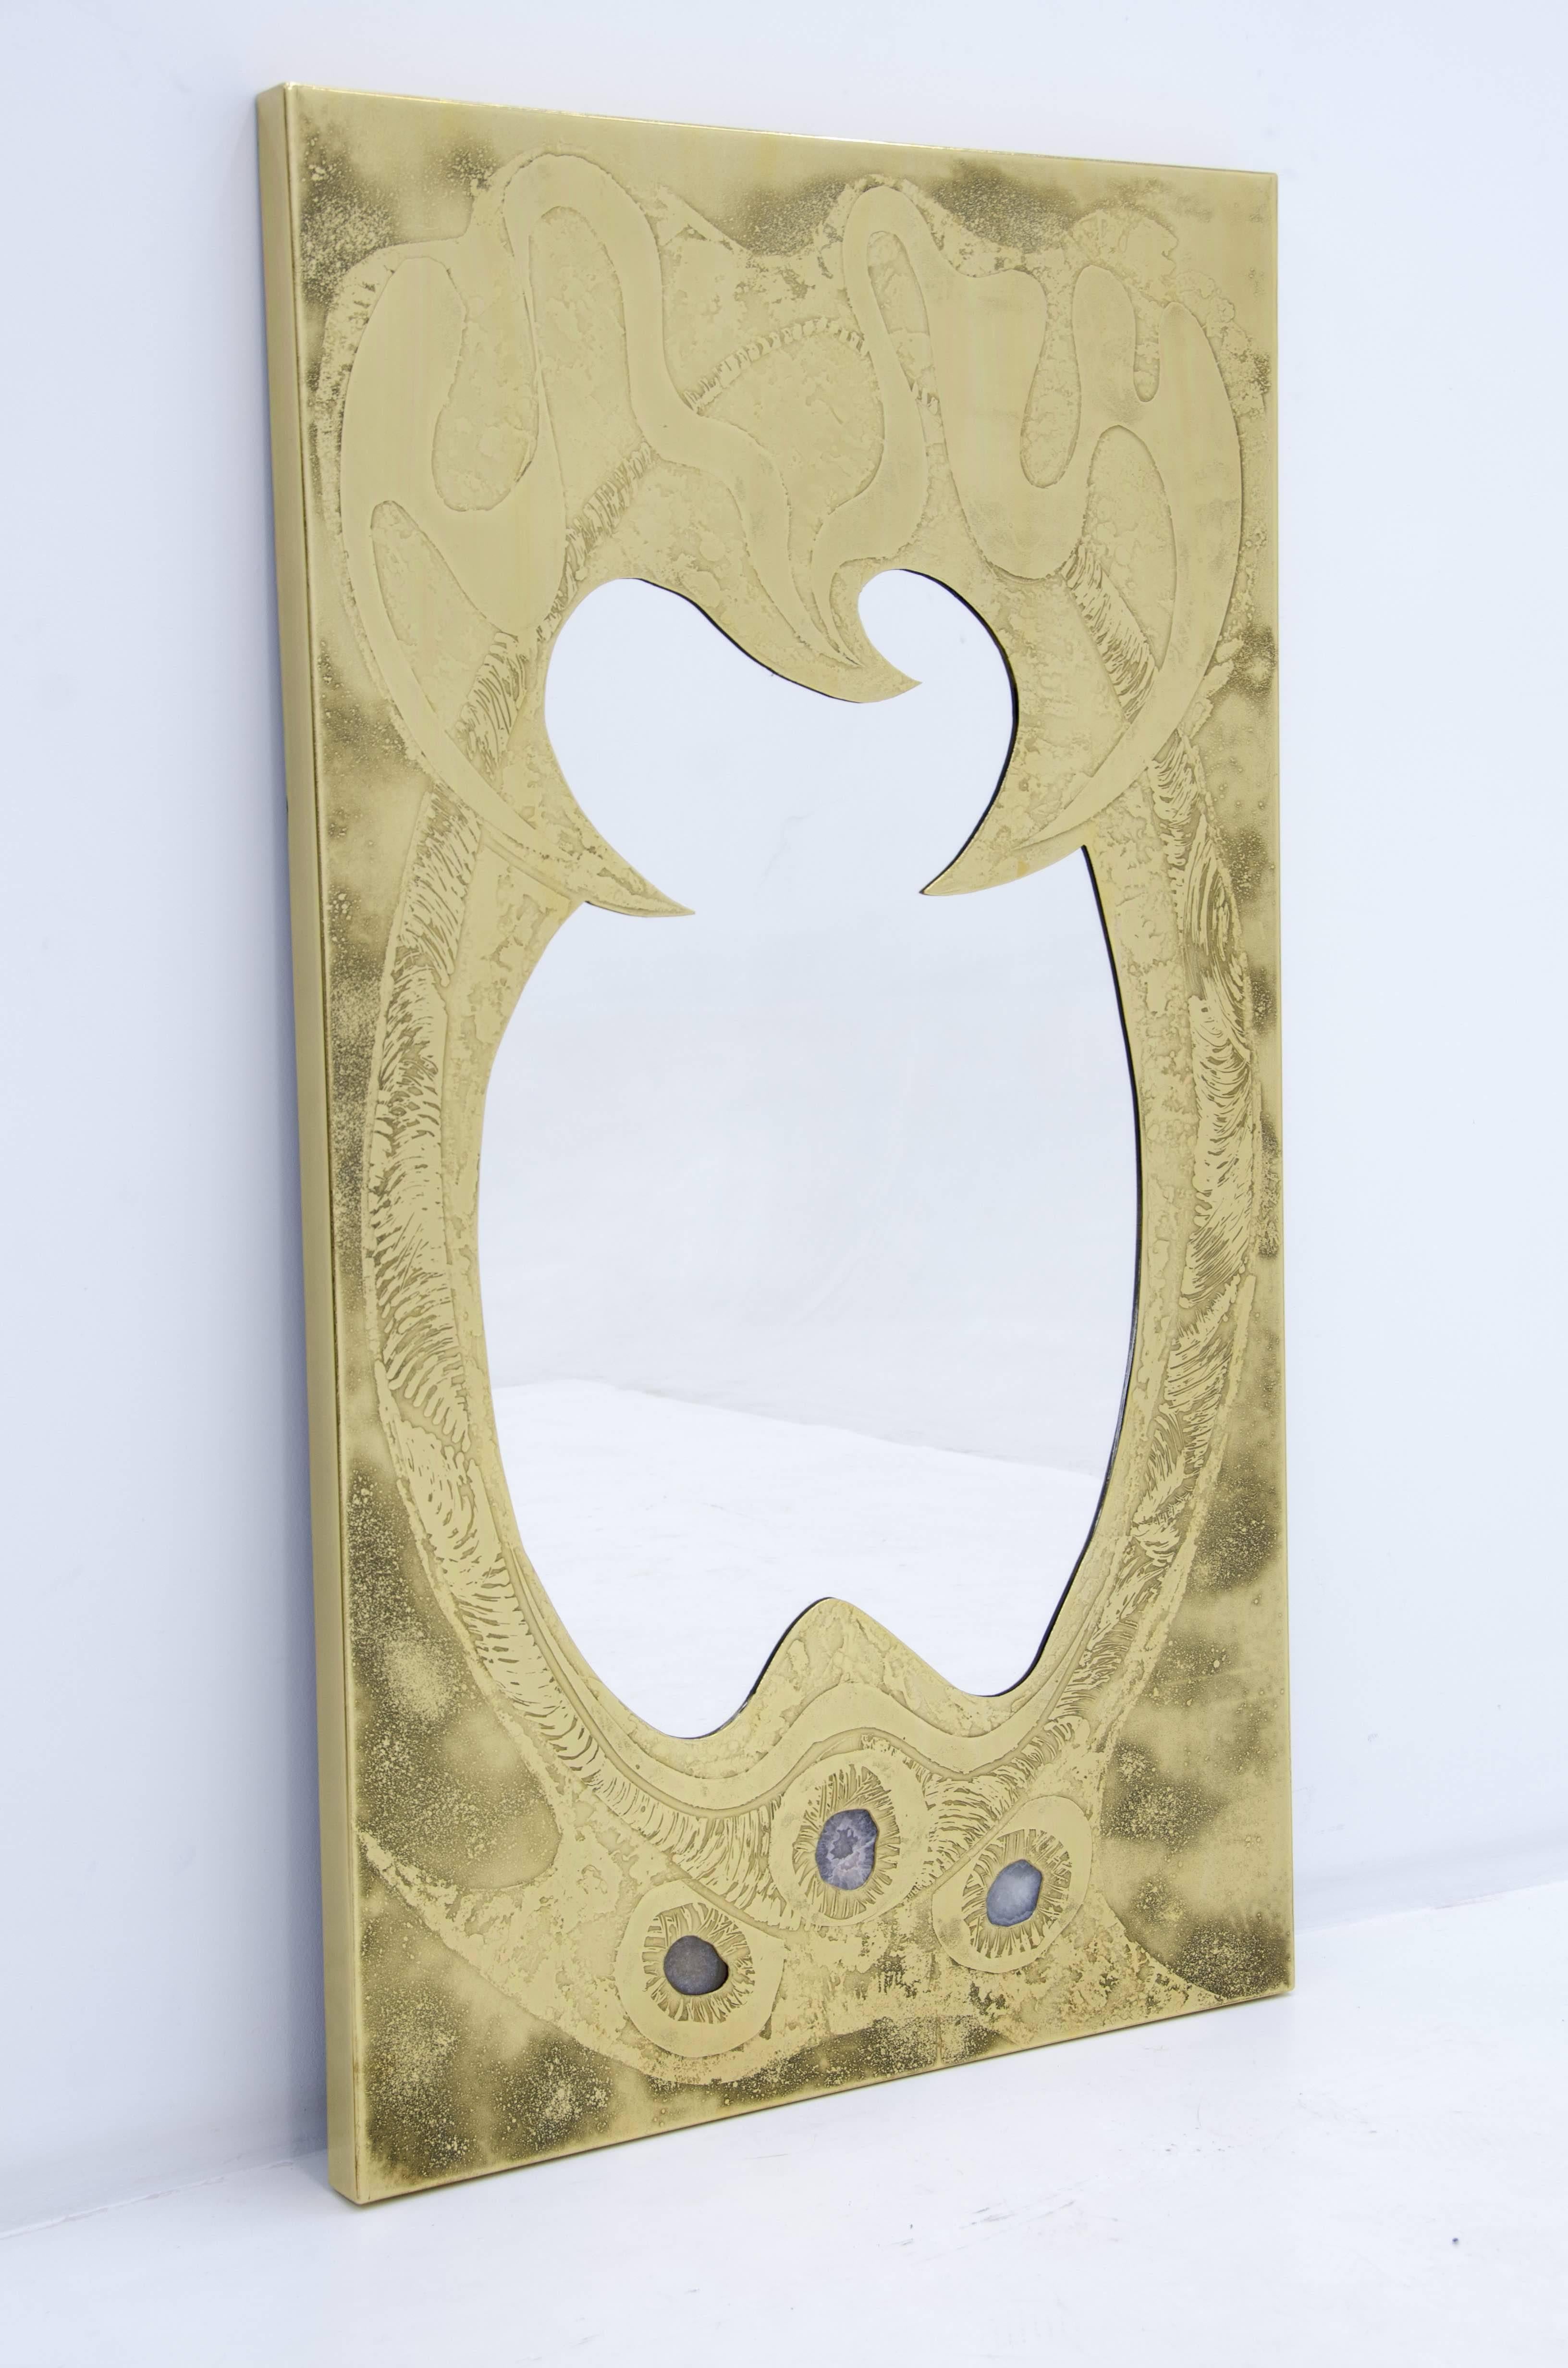 Etched brass mirror by Willy Daro, inlay by three agates.